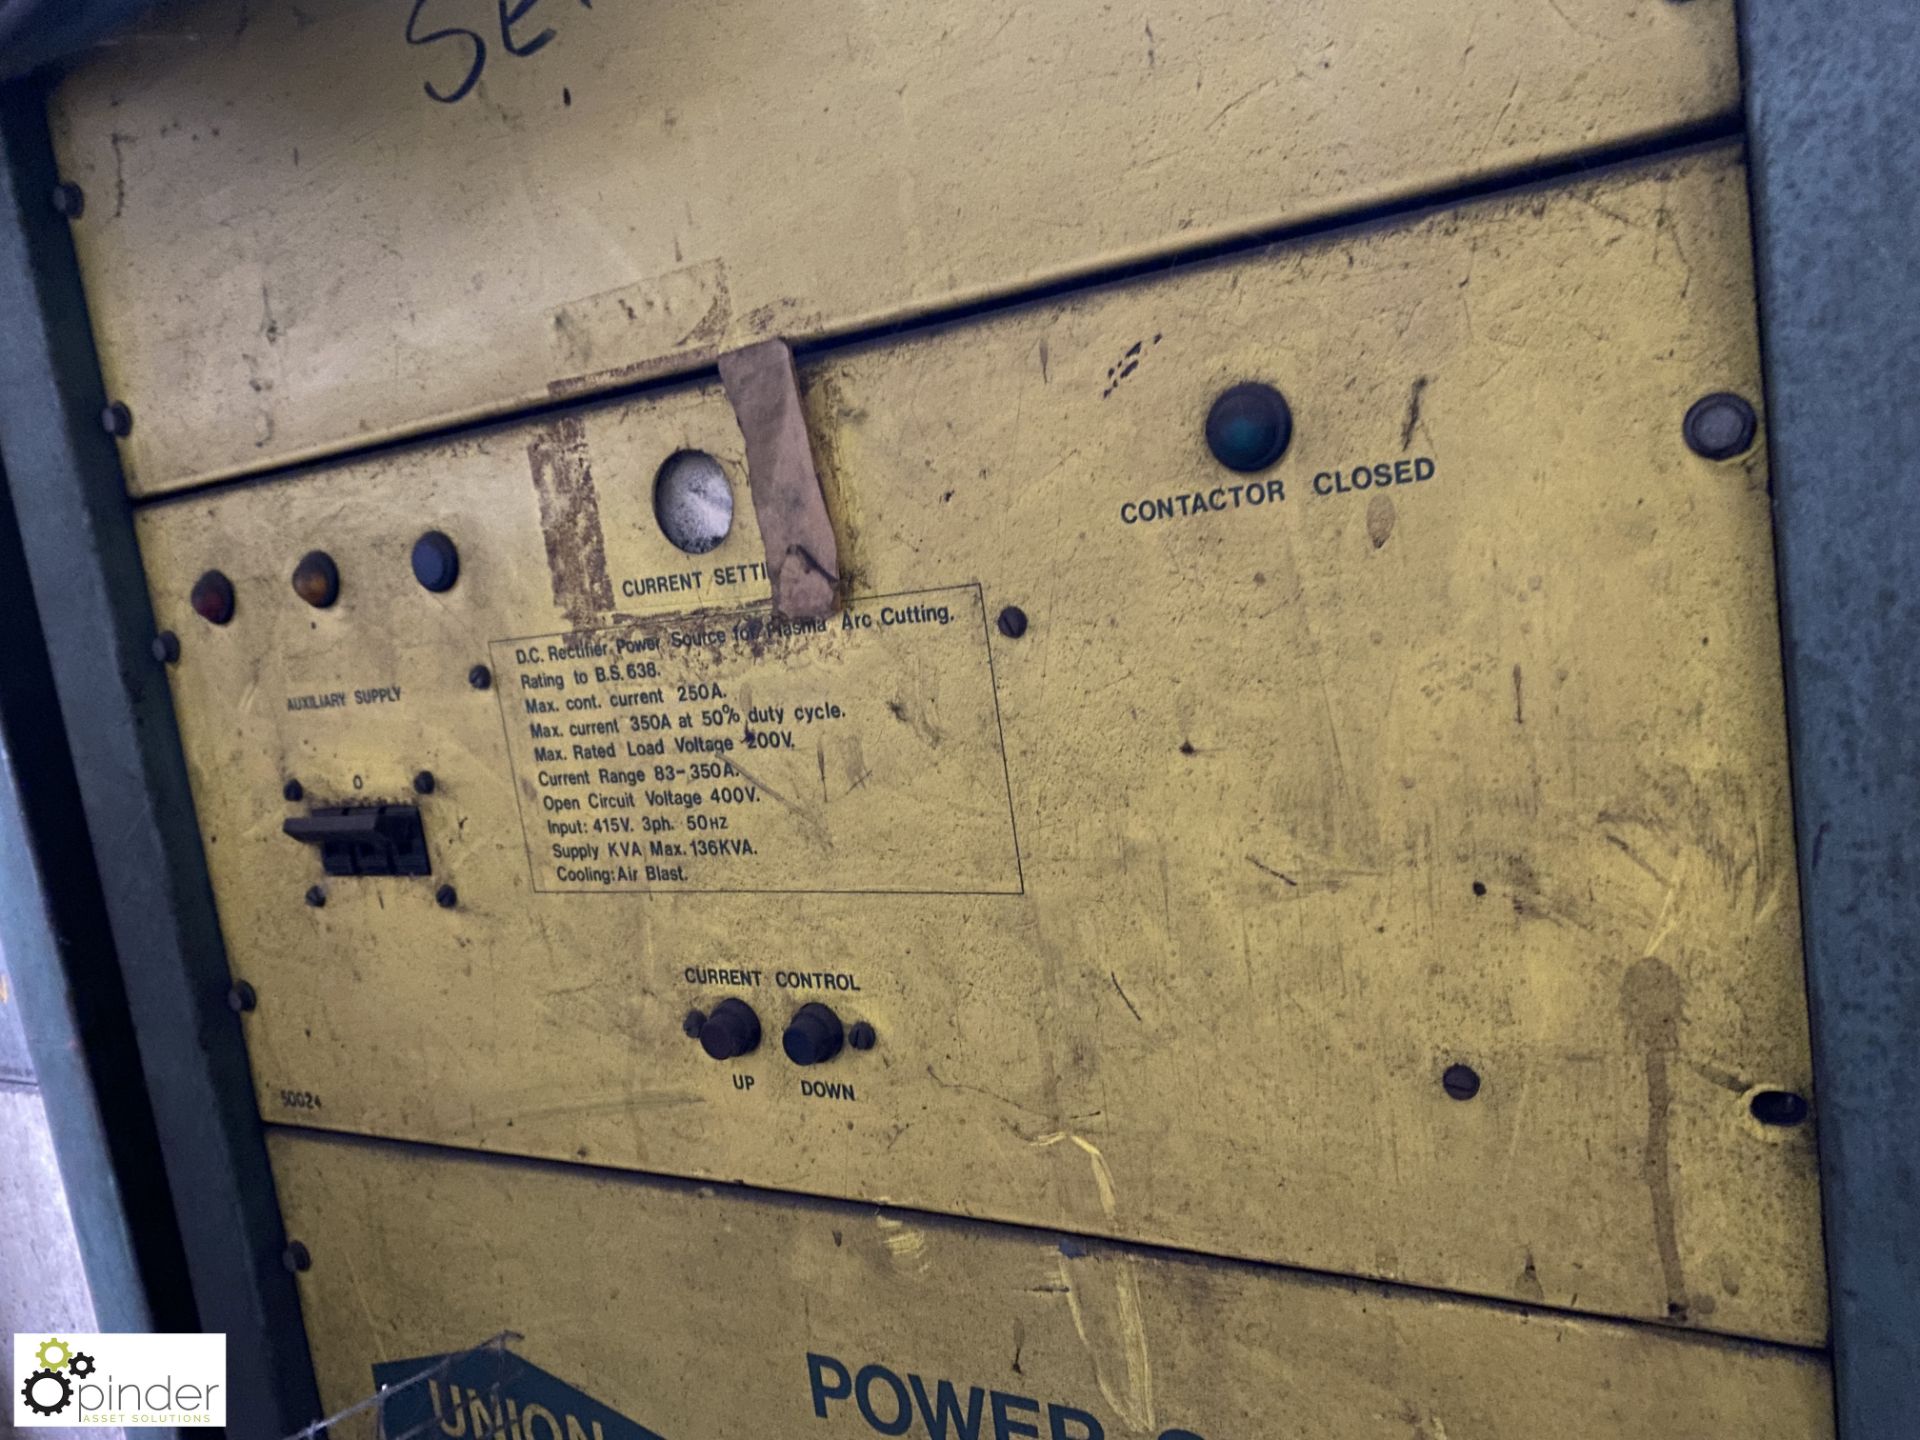 Union Carbite Power Supply PHC 250 (not in use) - Image 3 of 5